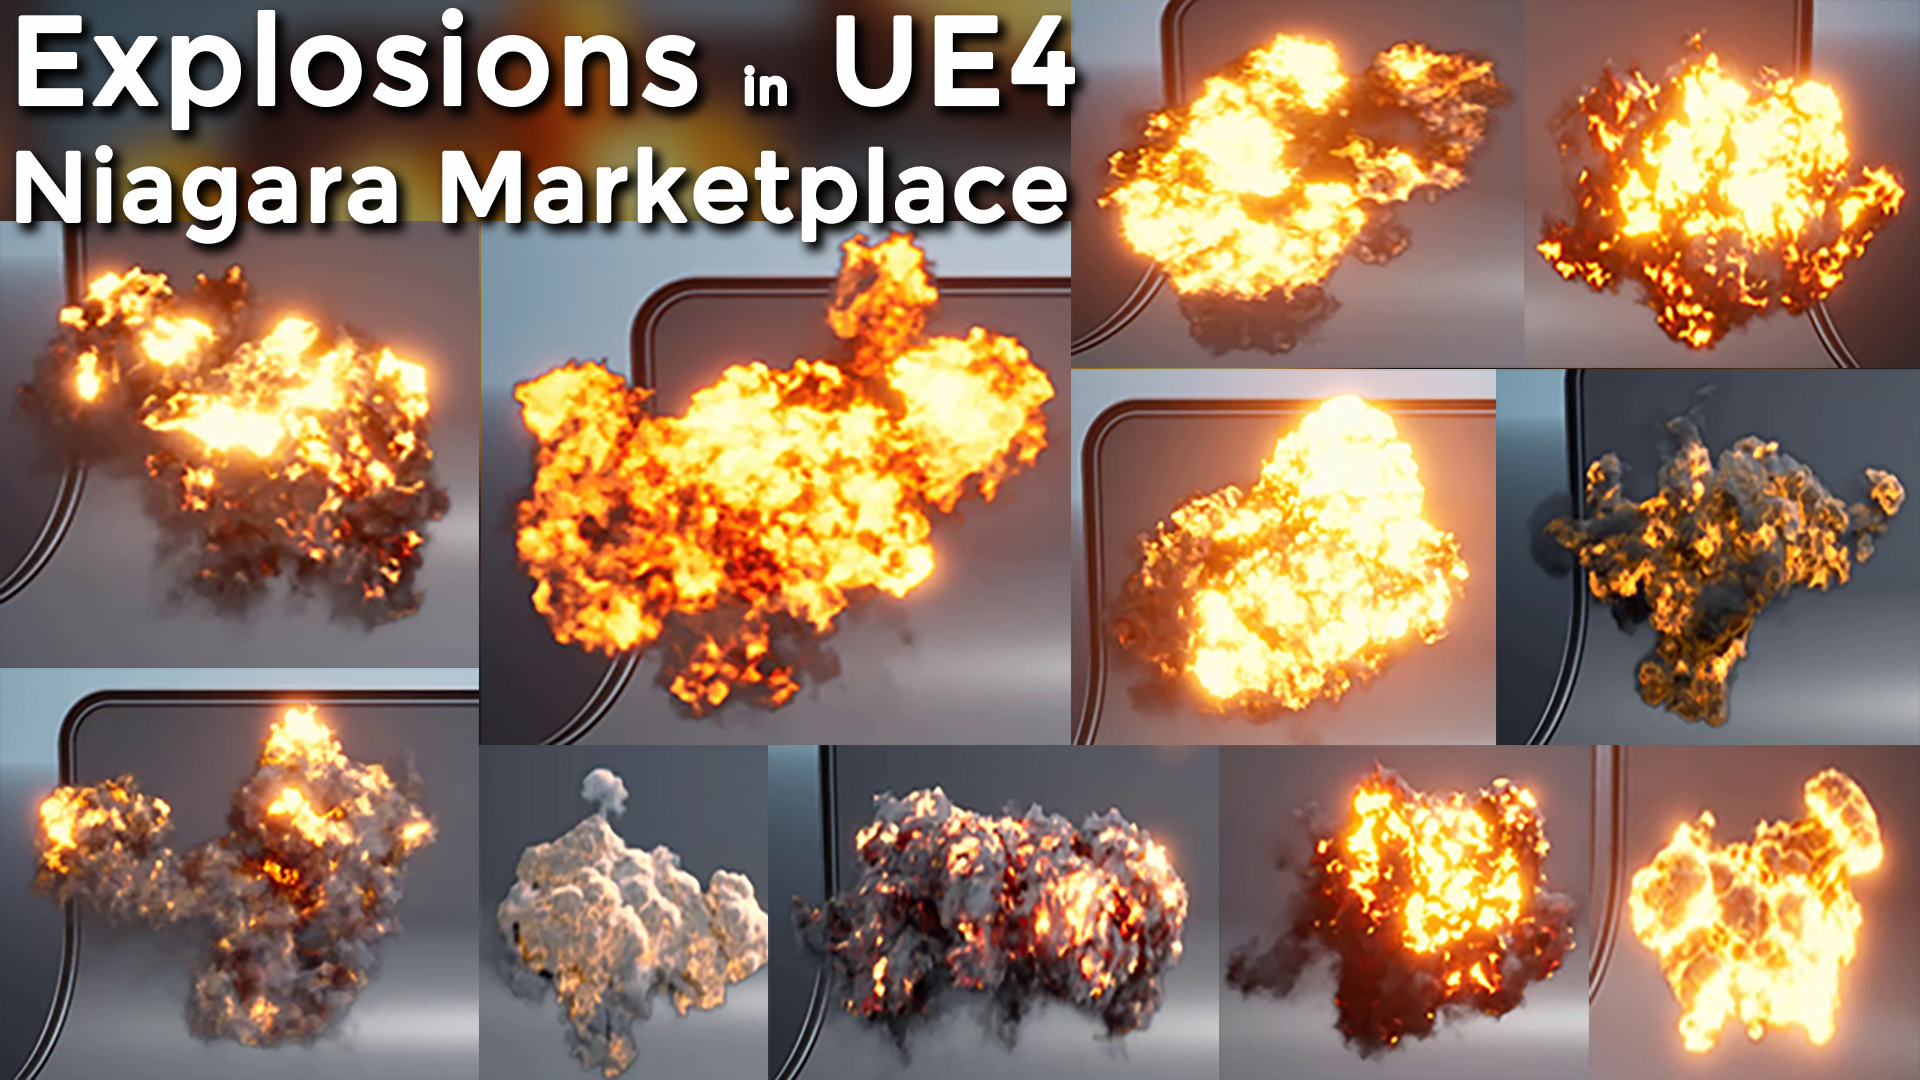 Explosion in UE4 Niagara Pack 08 in Marketplace